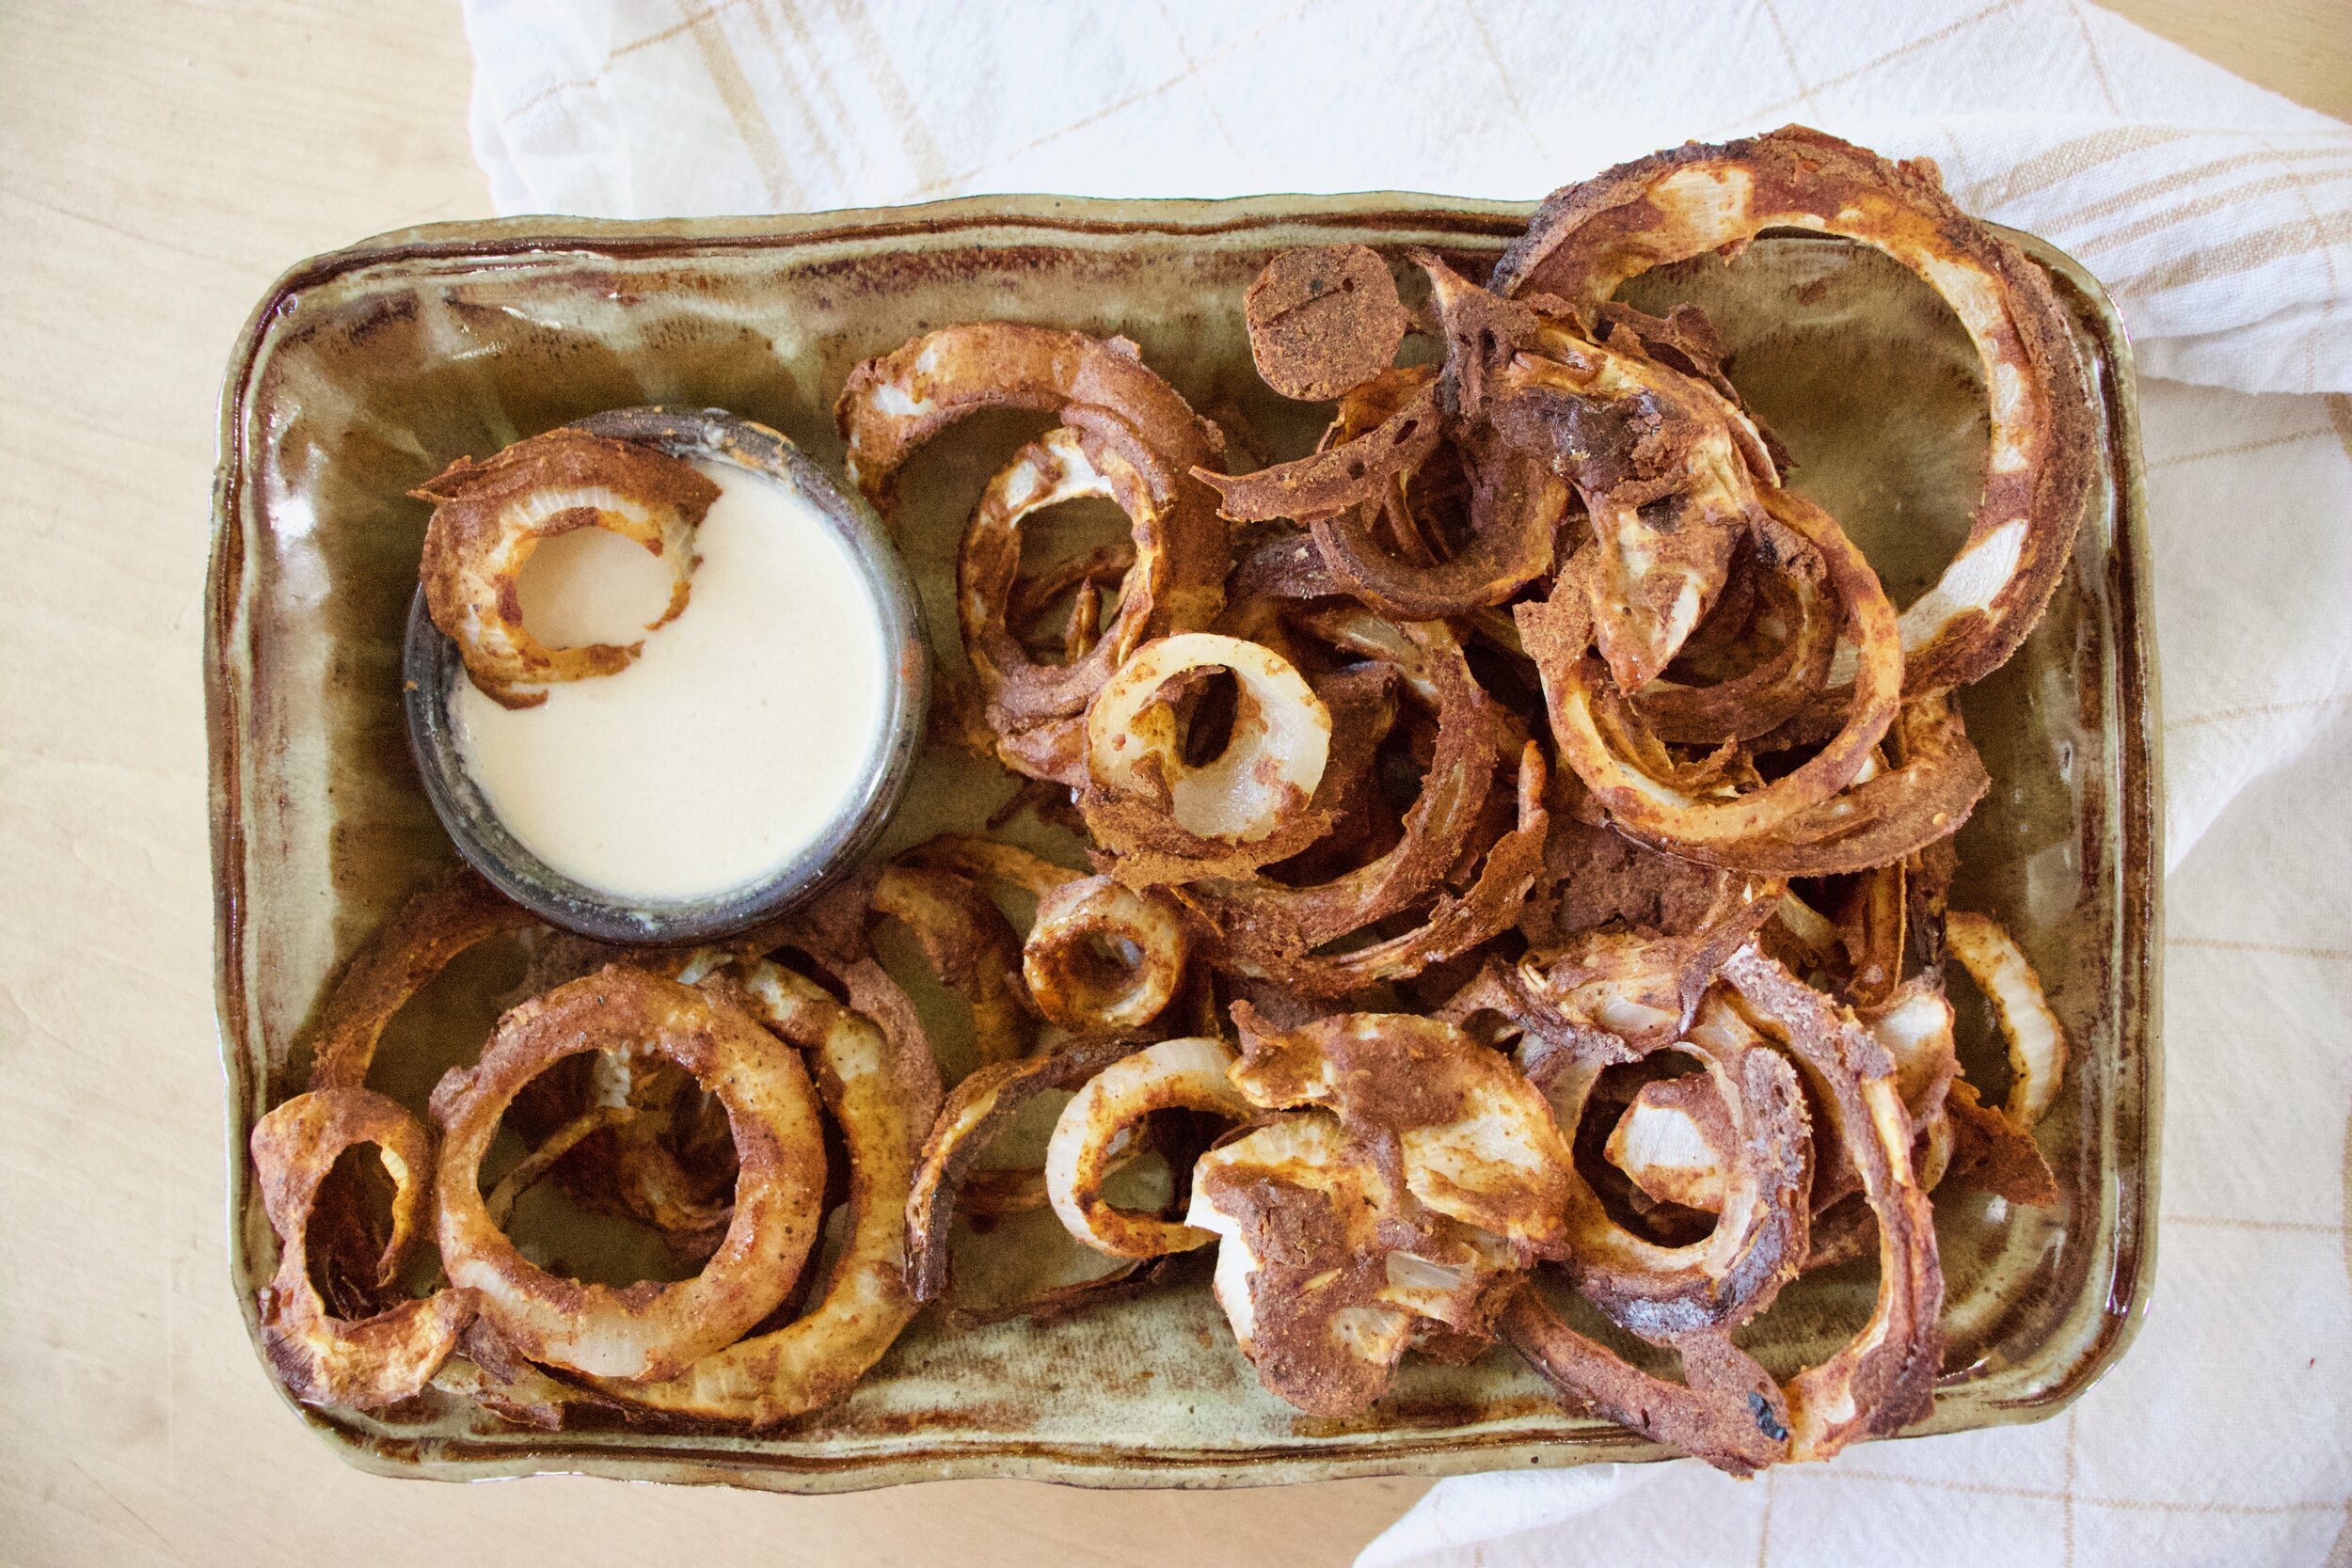 10 Best Onion Rings Recipes | Yummly